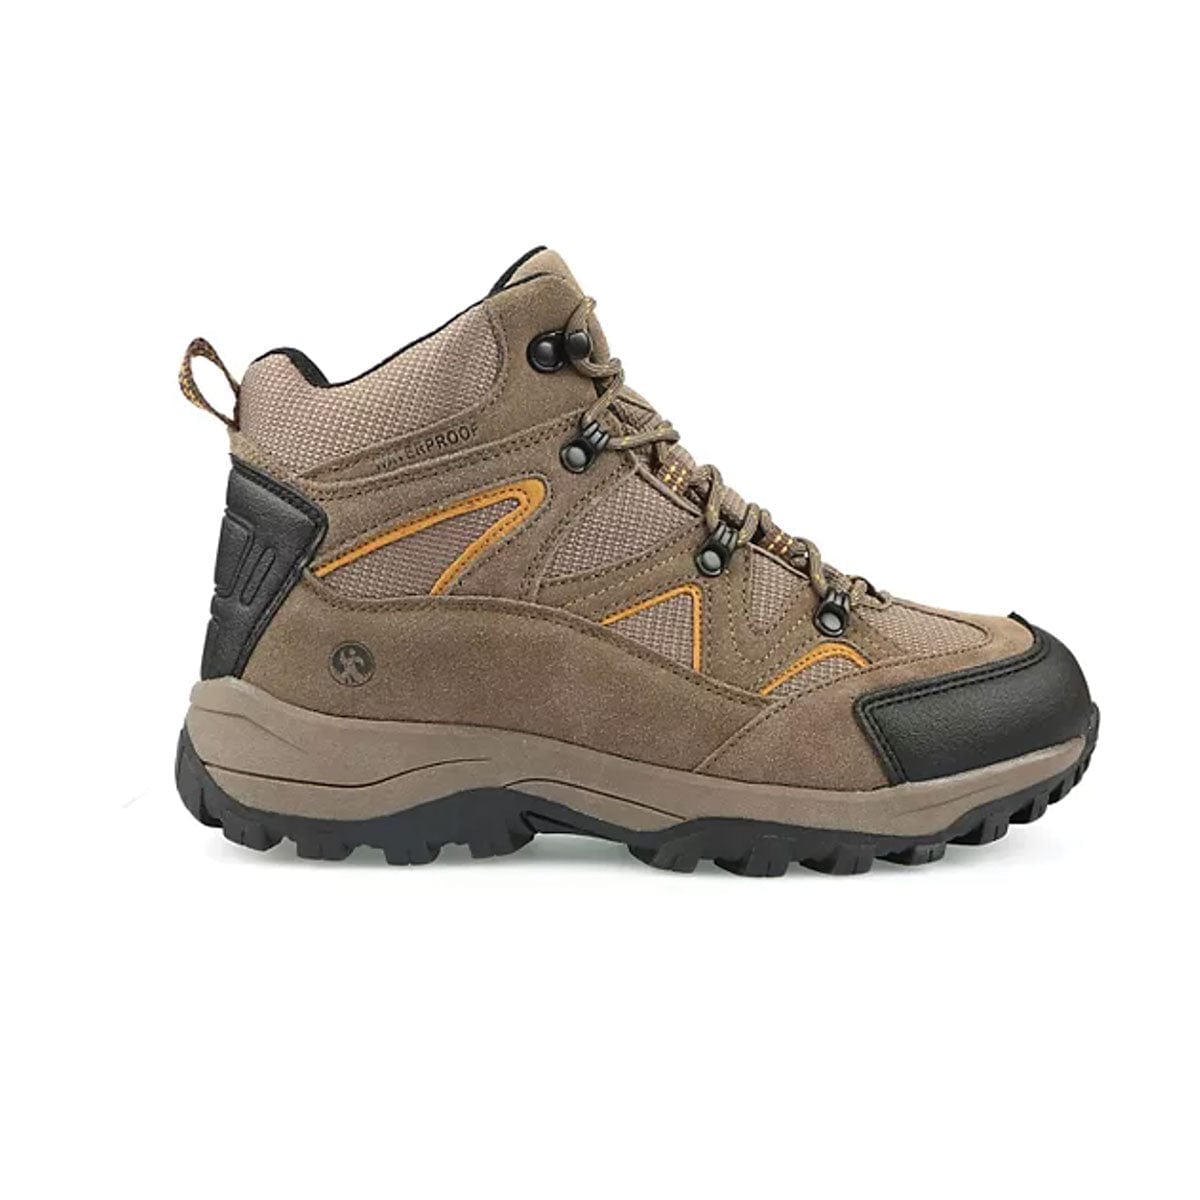 Northside Snohomish 6" Mid Waterproof Hiking Boots